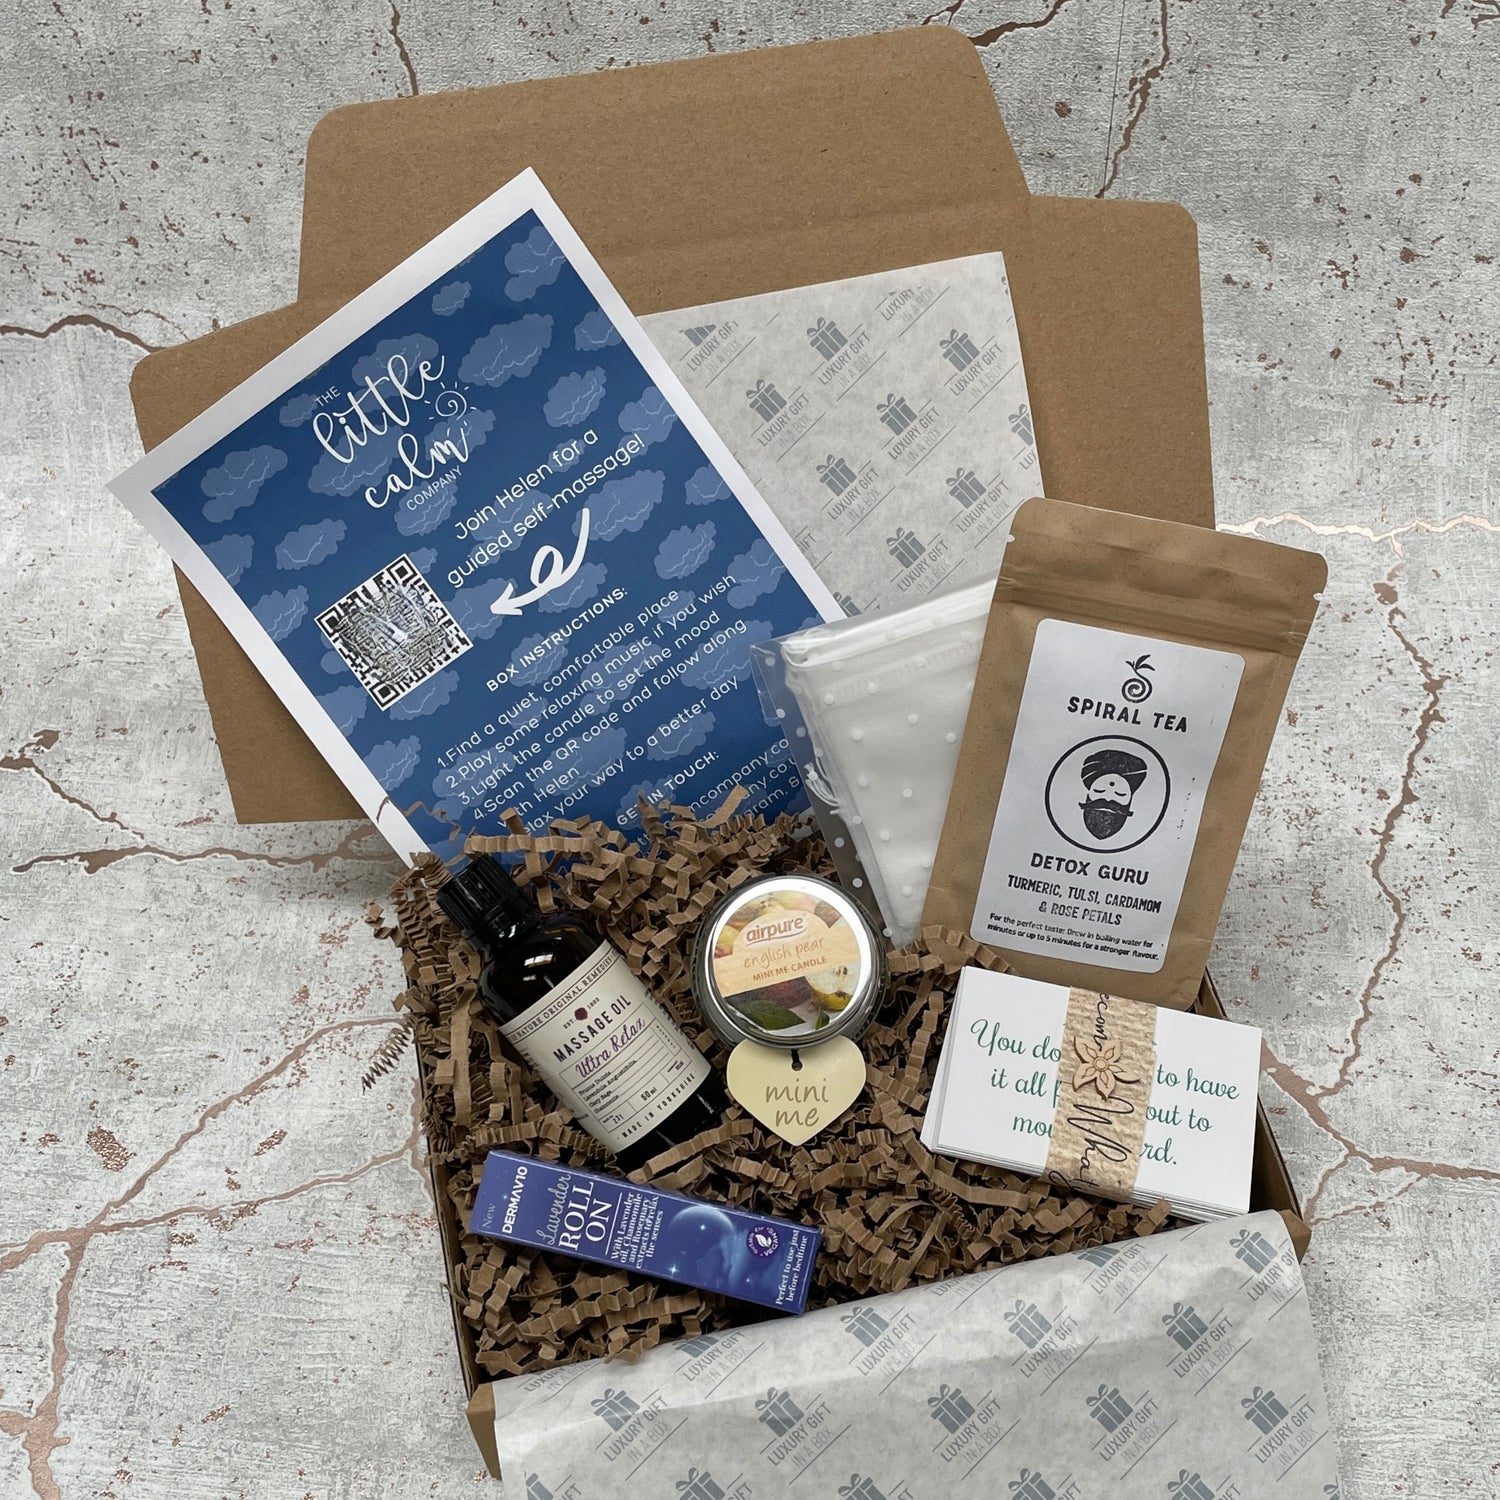 calming gift box with assortment of gifts